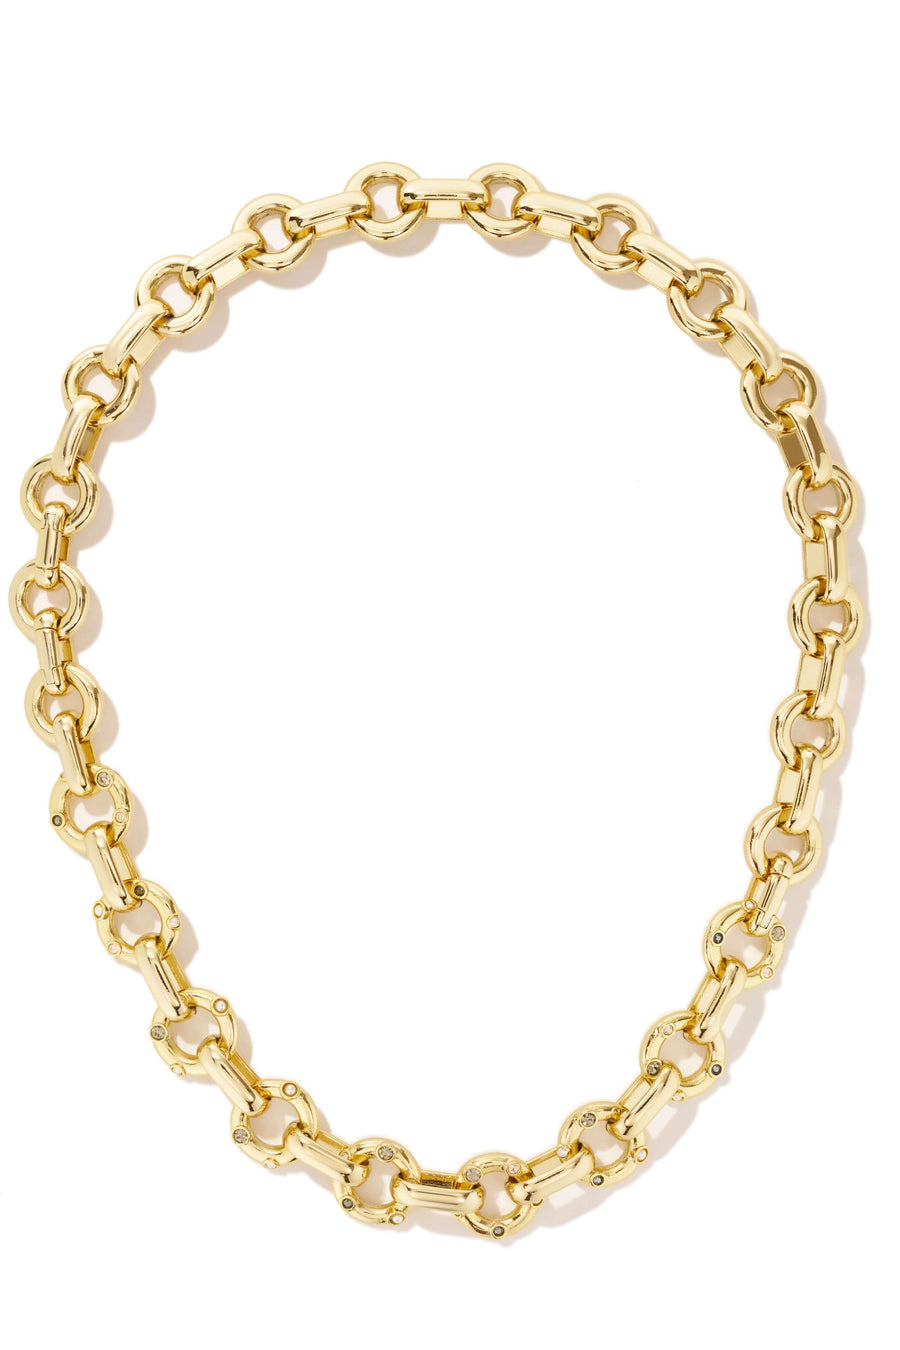 Lola Links Pave Convertible Necklace and Bracelet